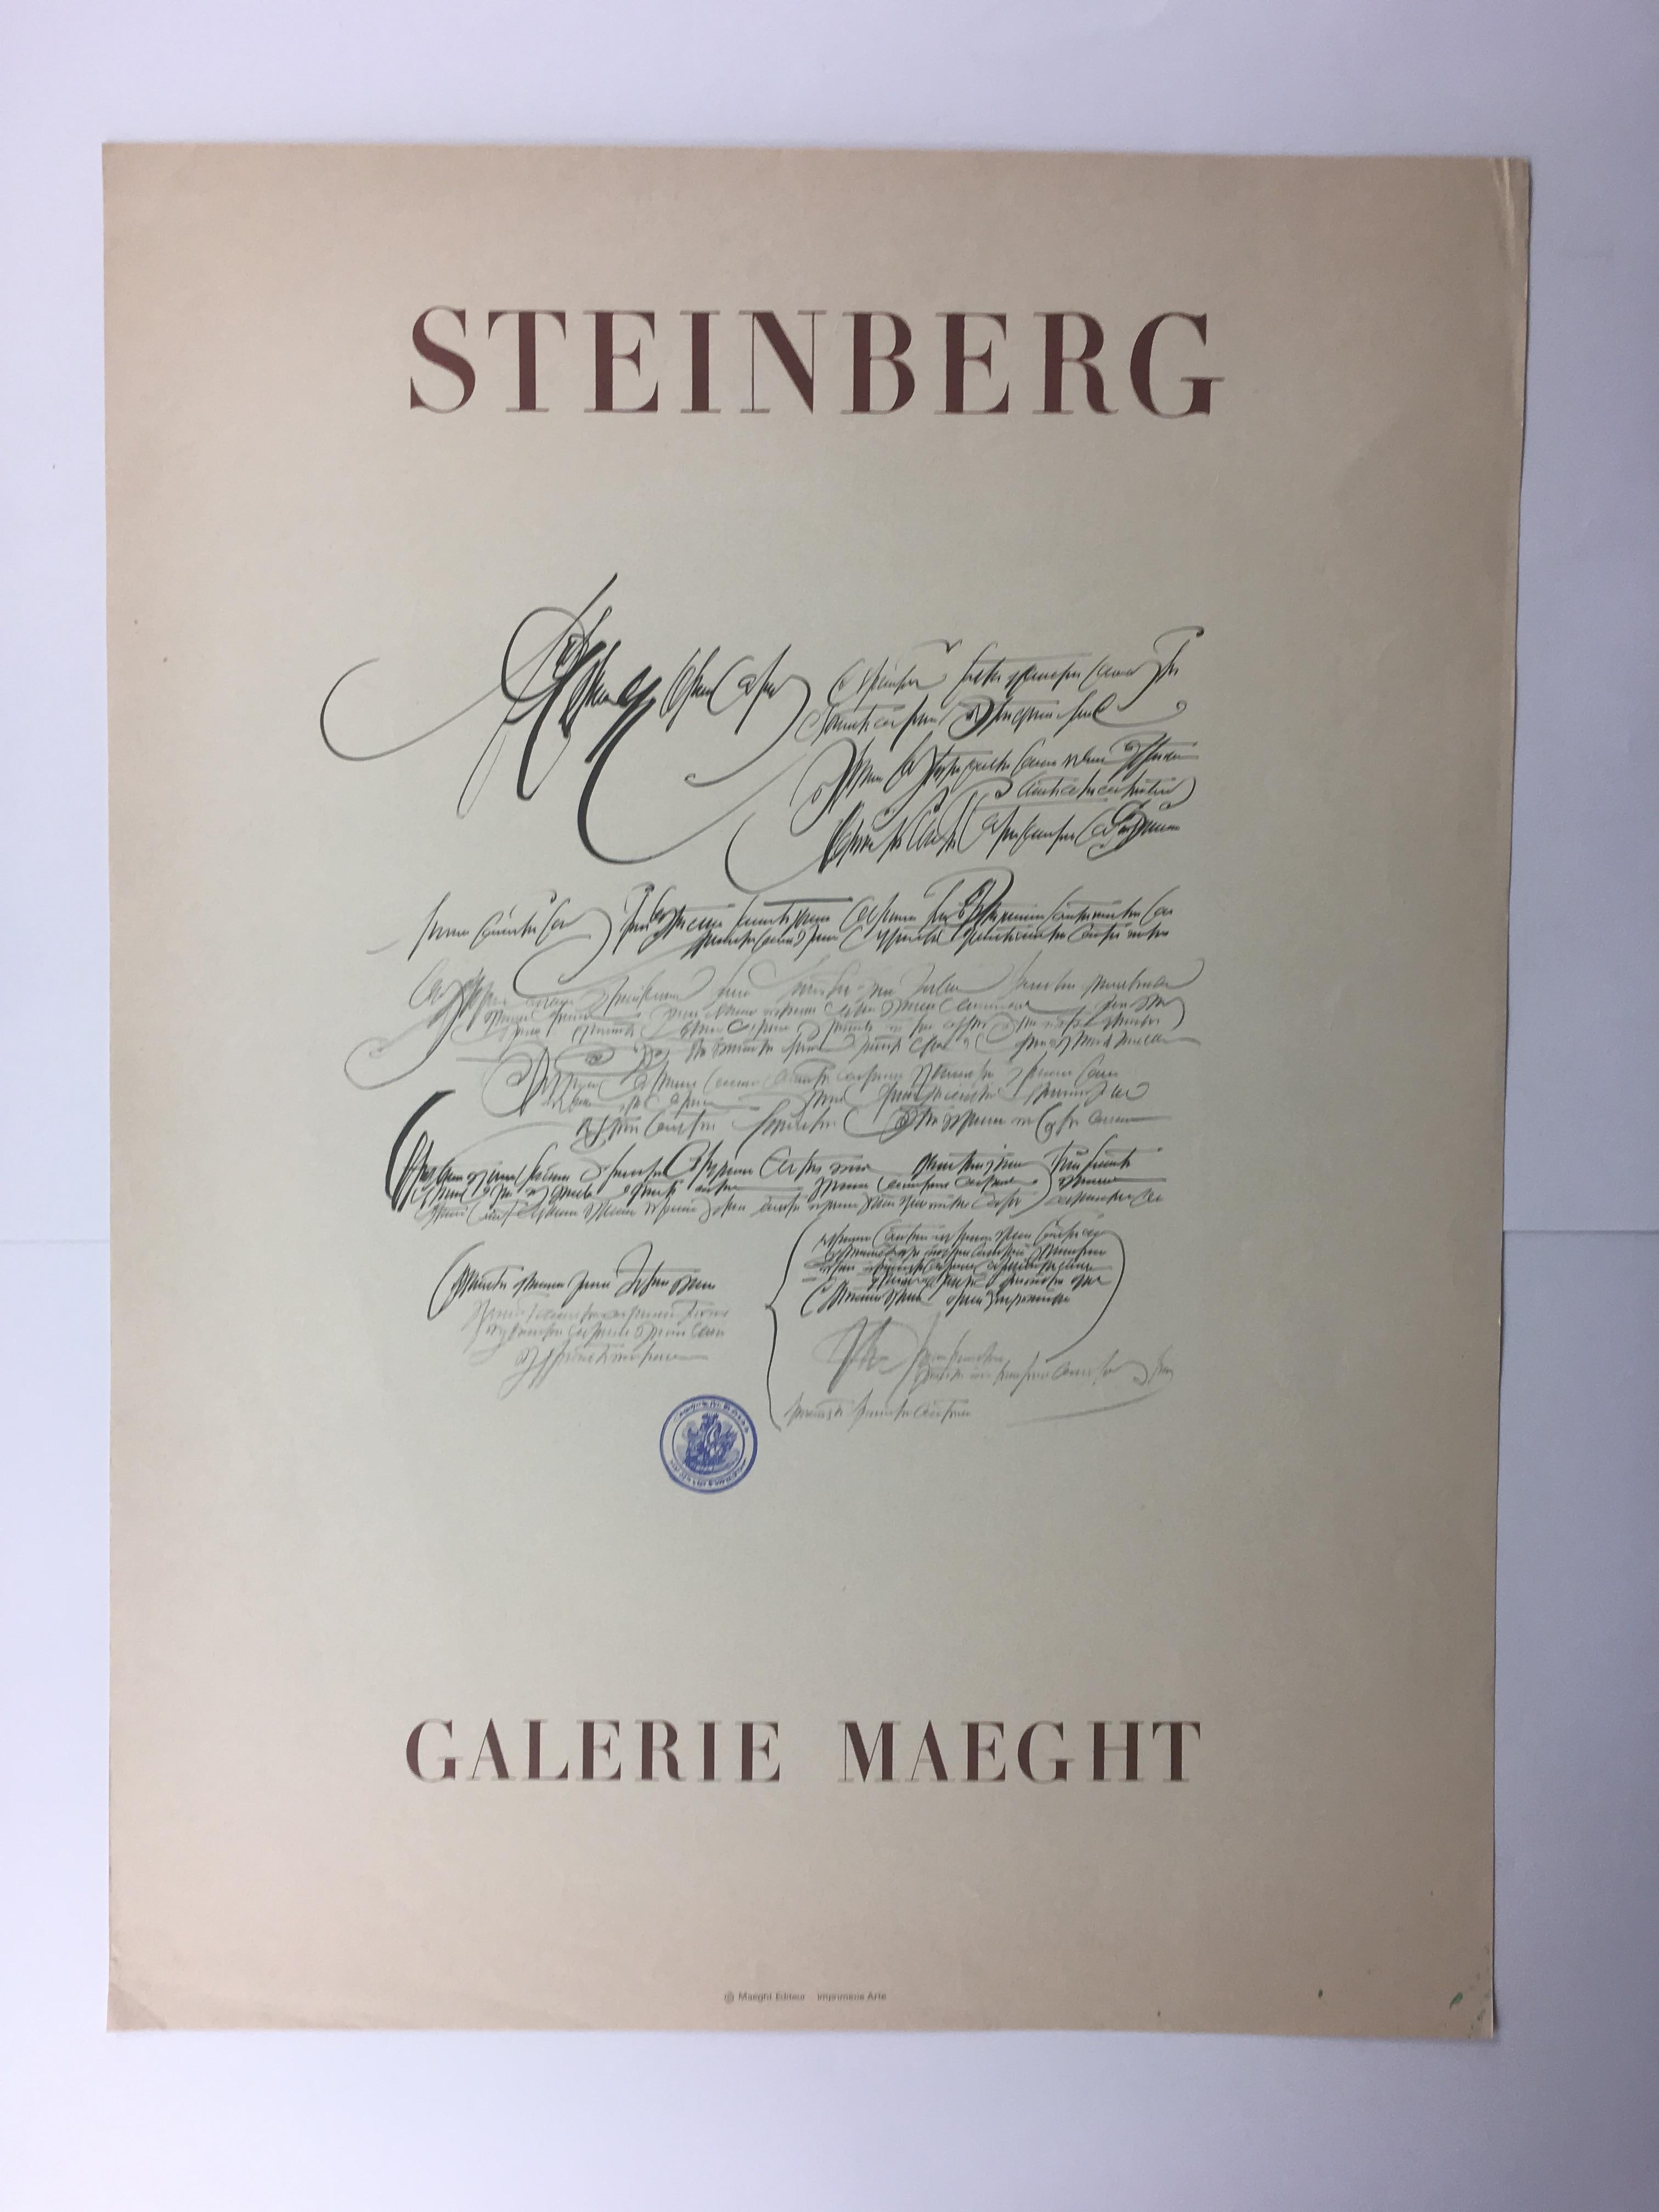 French Original Saul Steinberg Exhibition Poster from Galerie Maeght